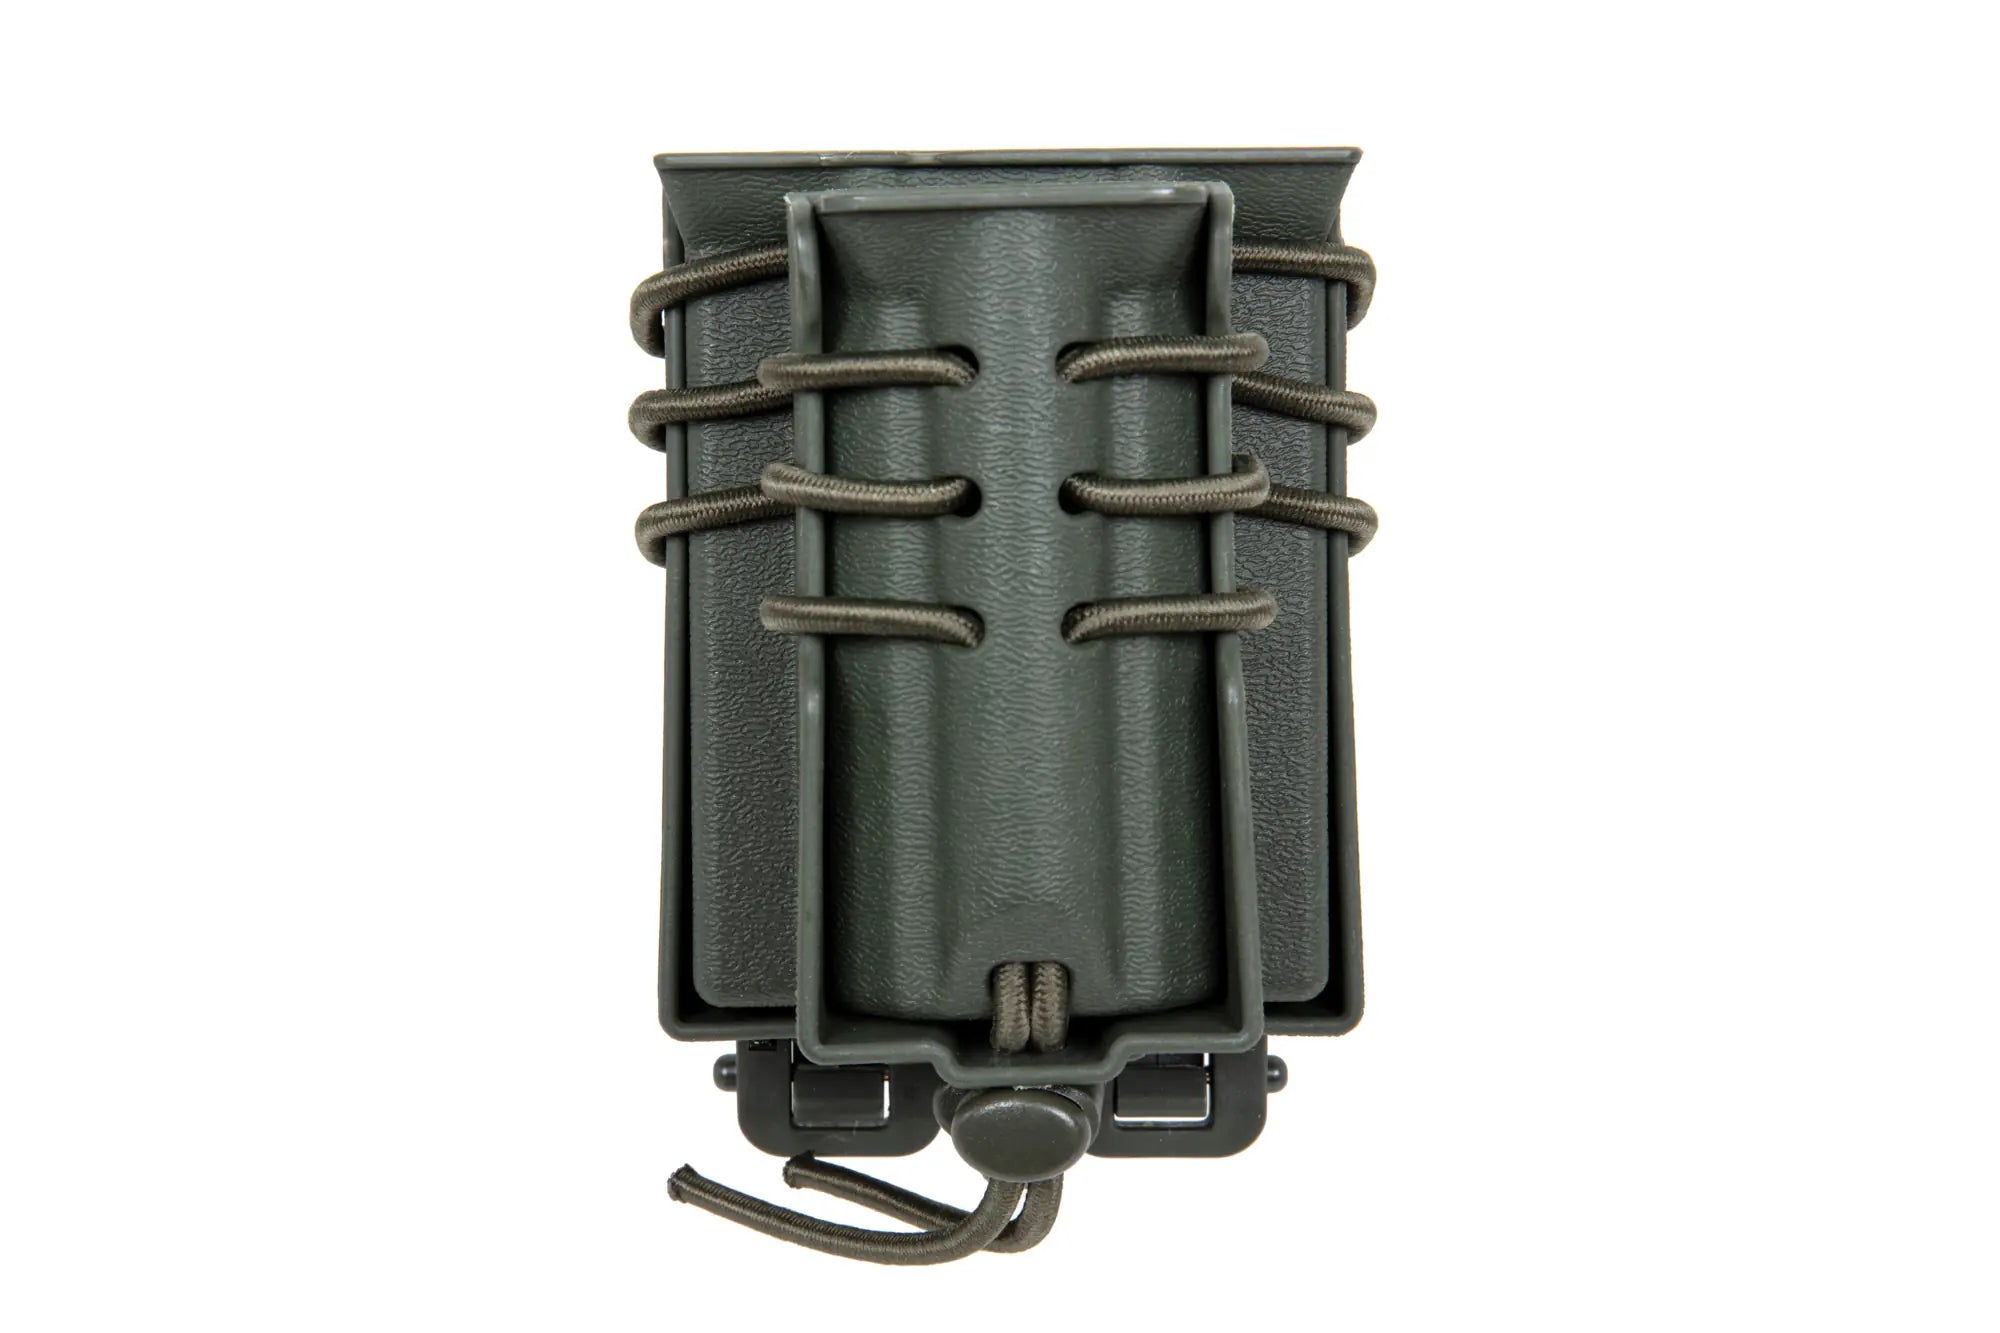 Carrier for 2 M4/M16 and 9mm magazines Wosport Urban Assault Quick Pull Olive